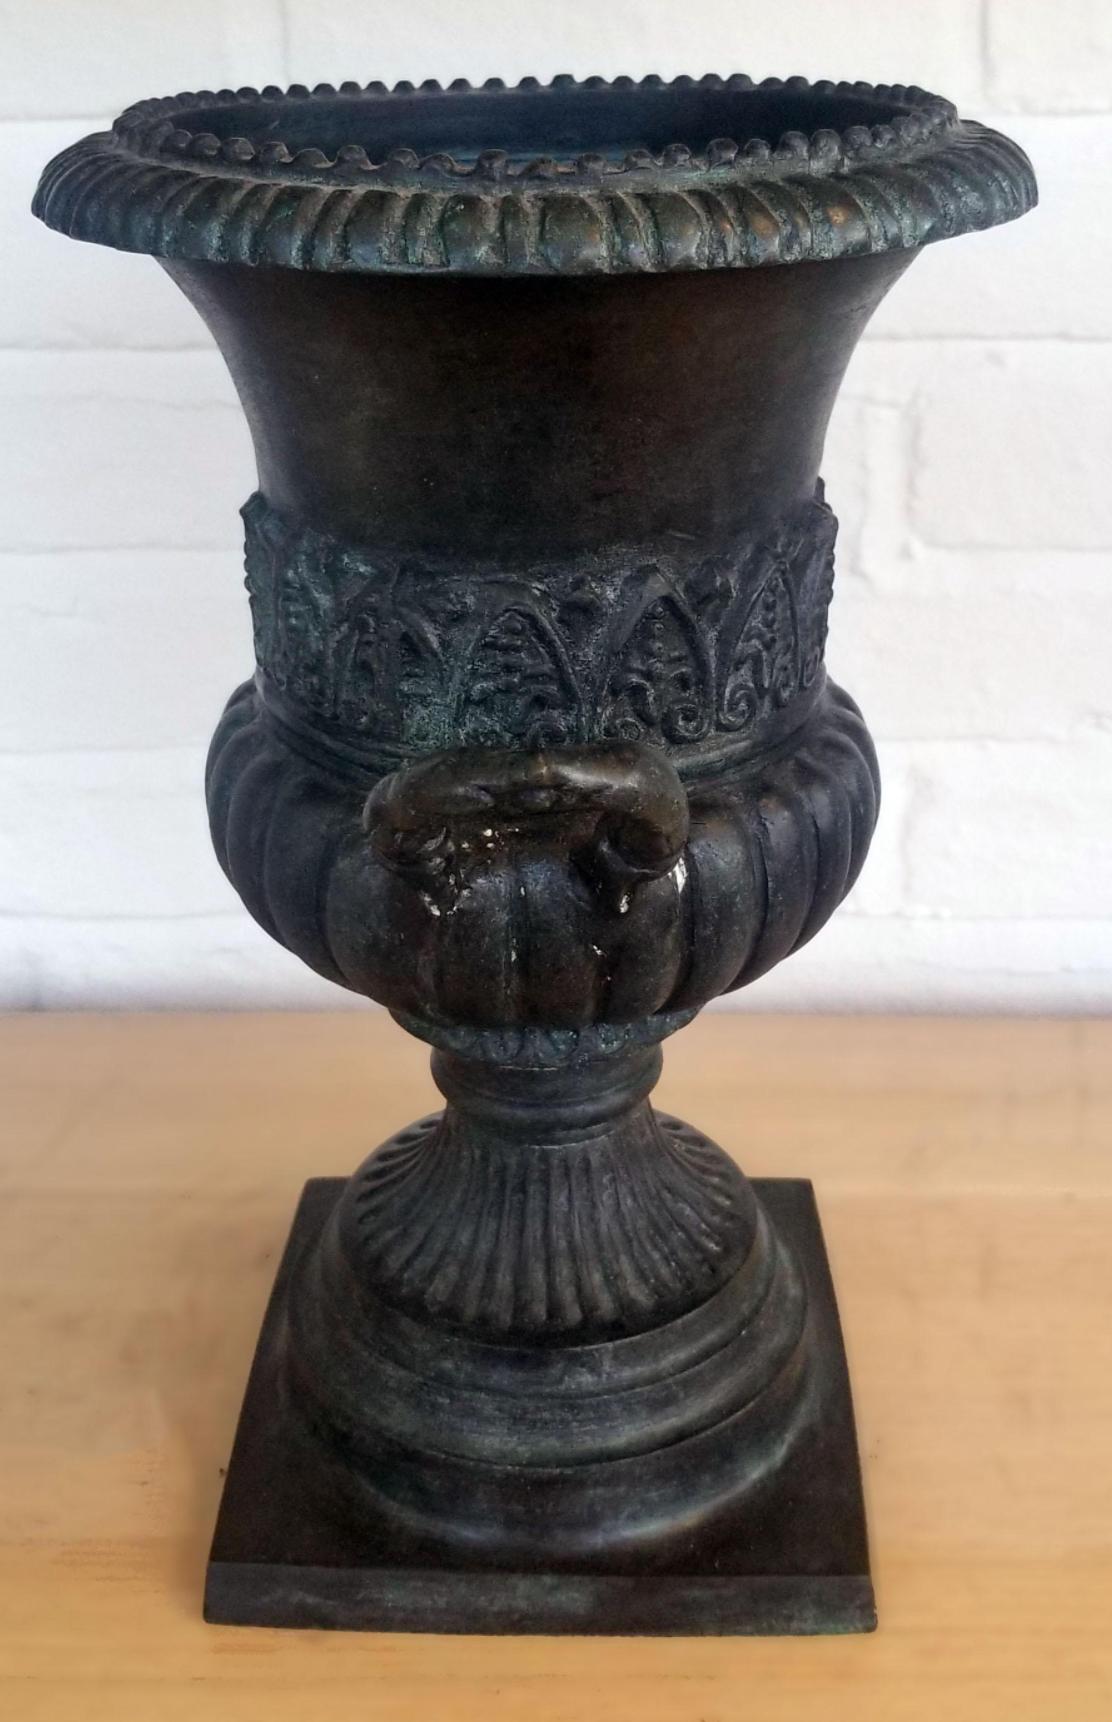 Maitland Smith Dark Bronze pair of Urns

These urns are part of a two piece set of cast dark bronze metal, trophy urn with side handles, measuring 13